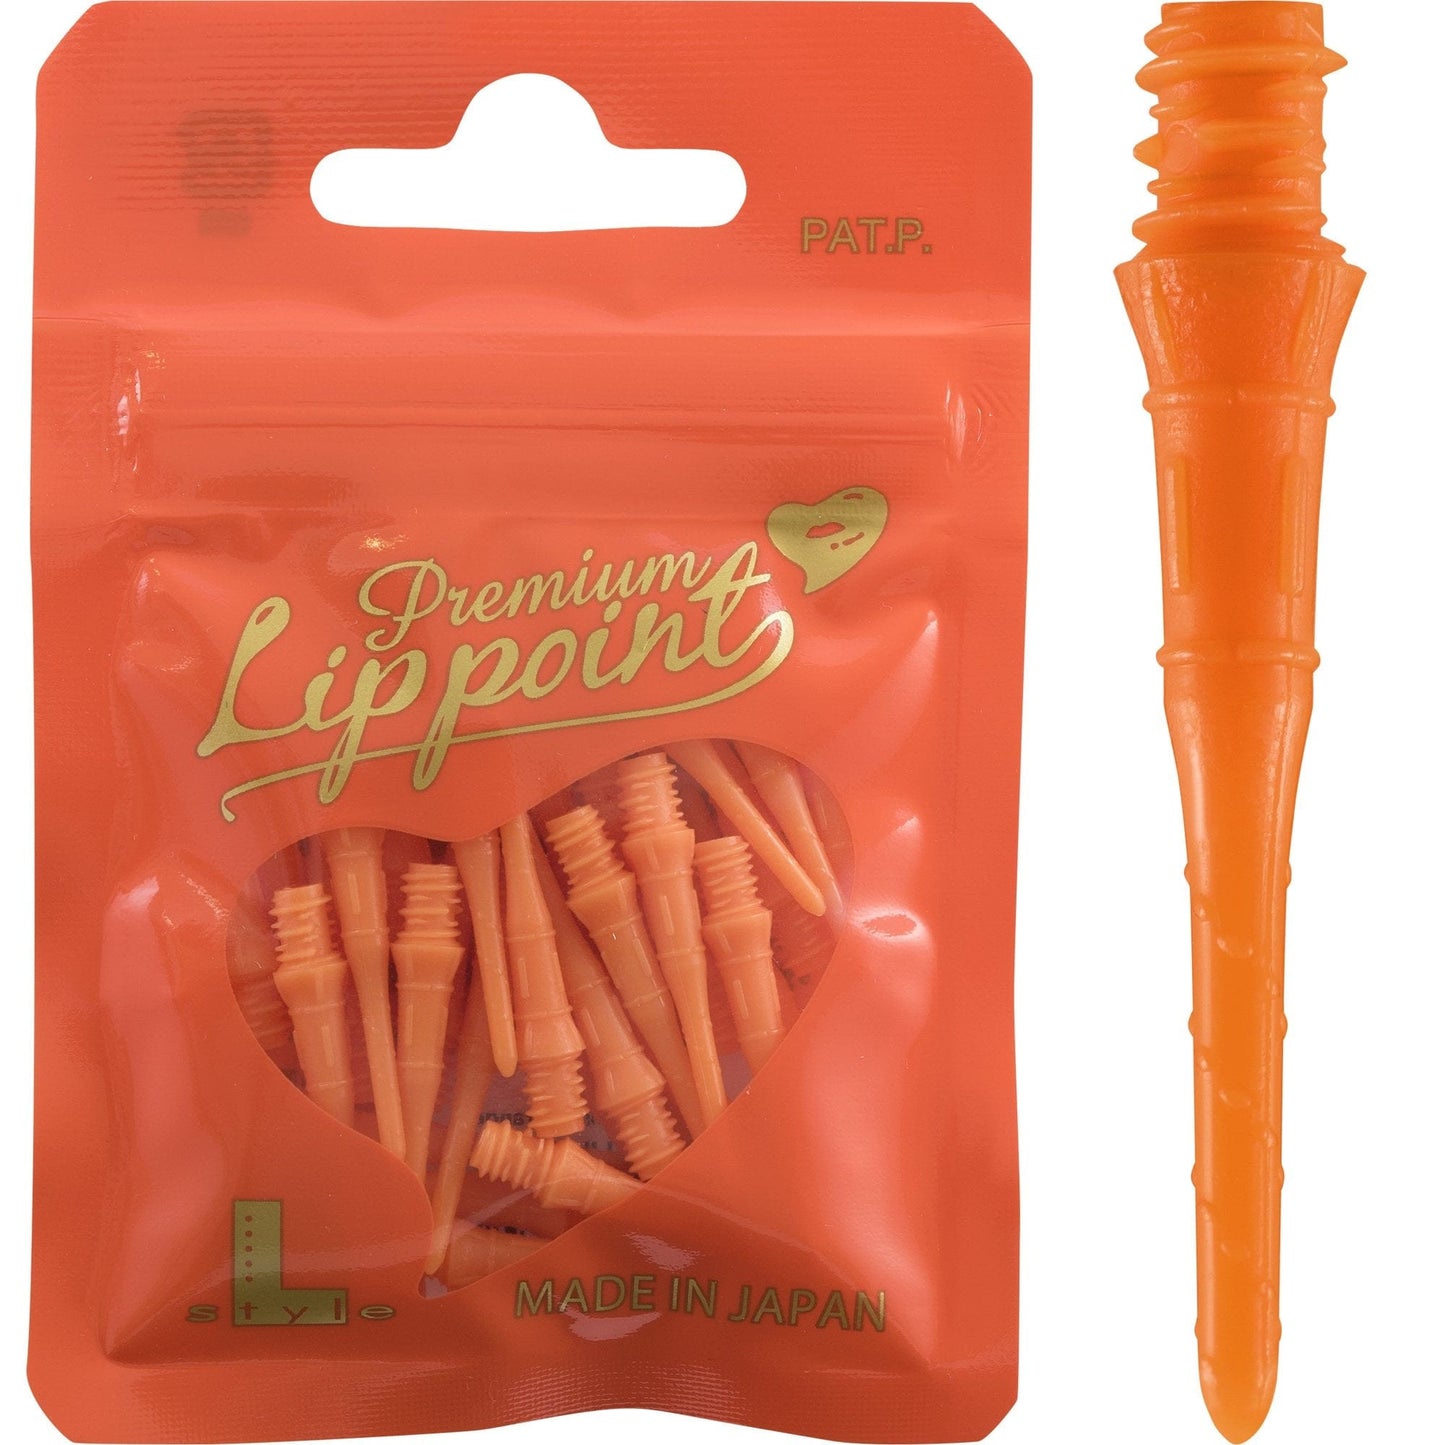 L-Style Premium LipPoint - Spare Tips - Lip Points - 2ba - Pack 30 Orange